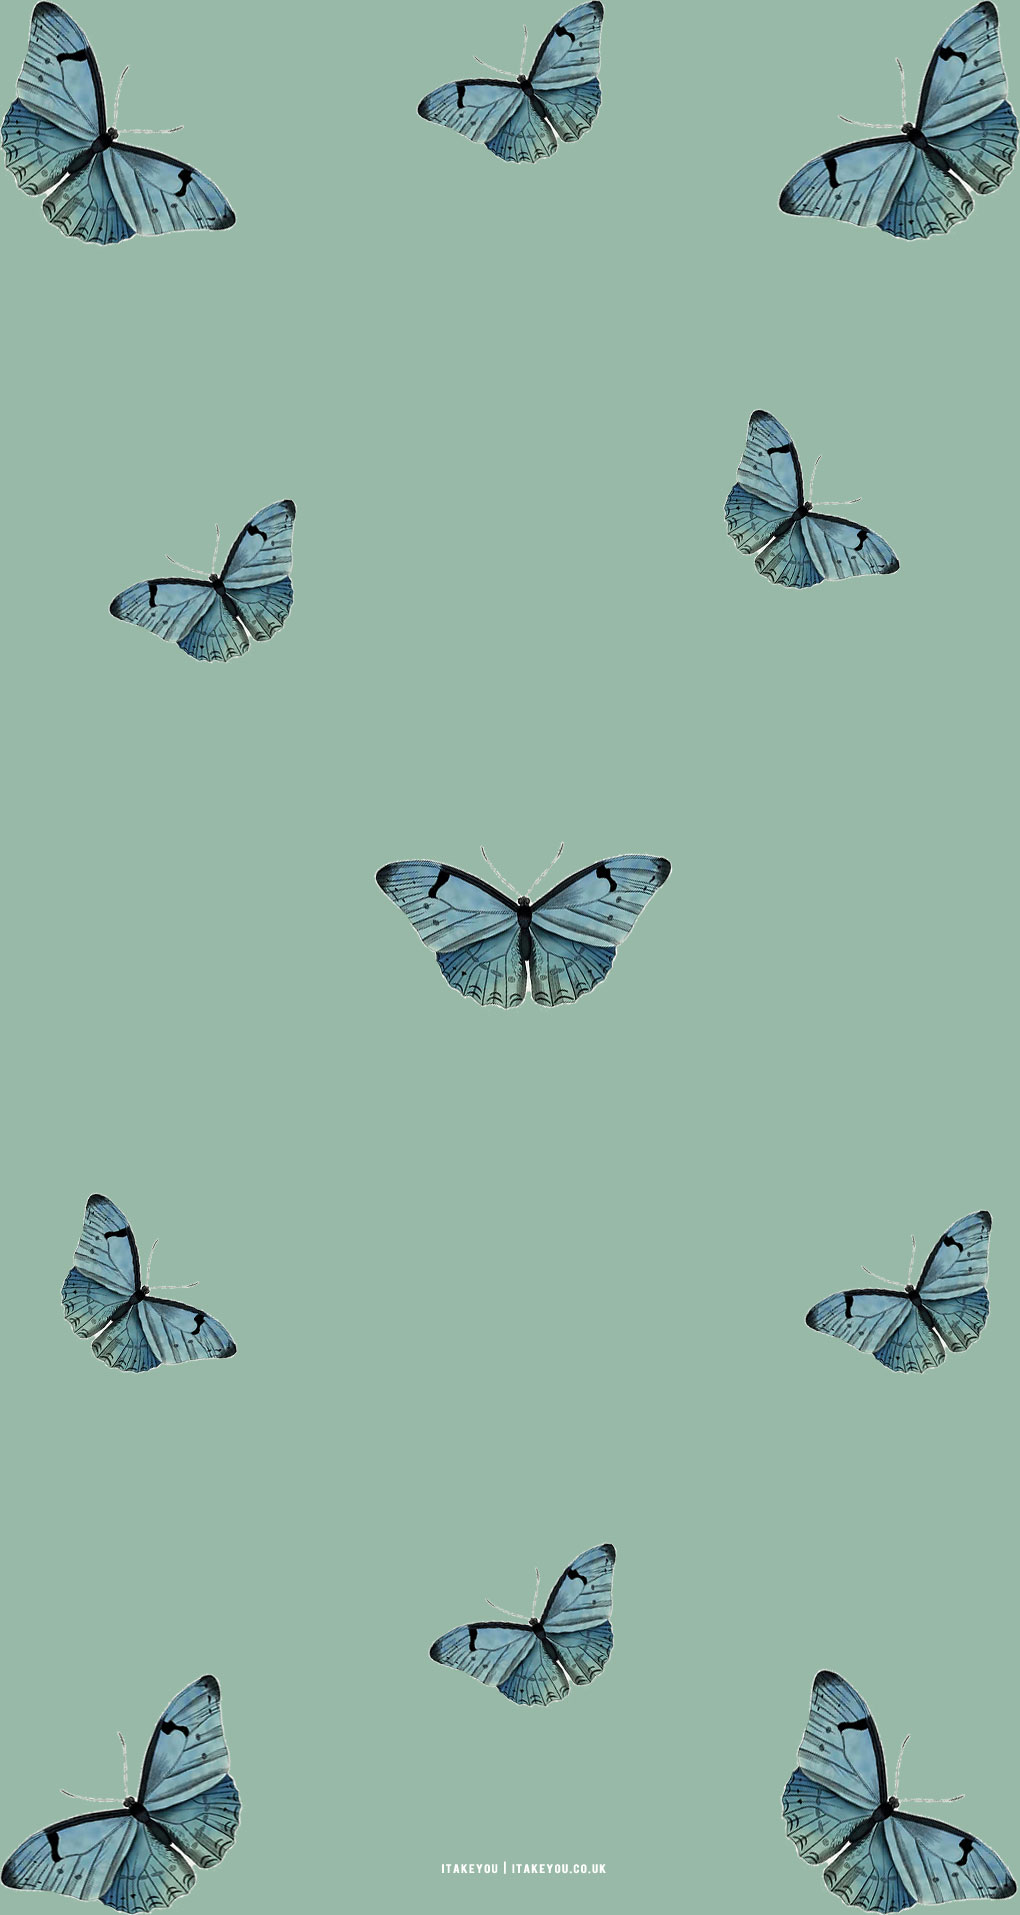 Cute Mint Green Aesthetic Wallpapers